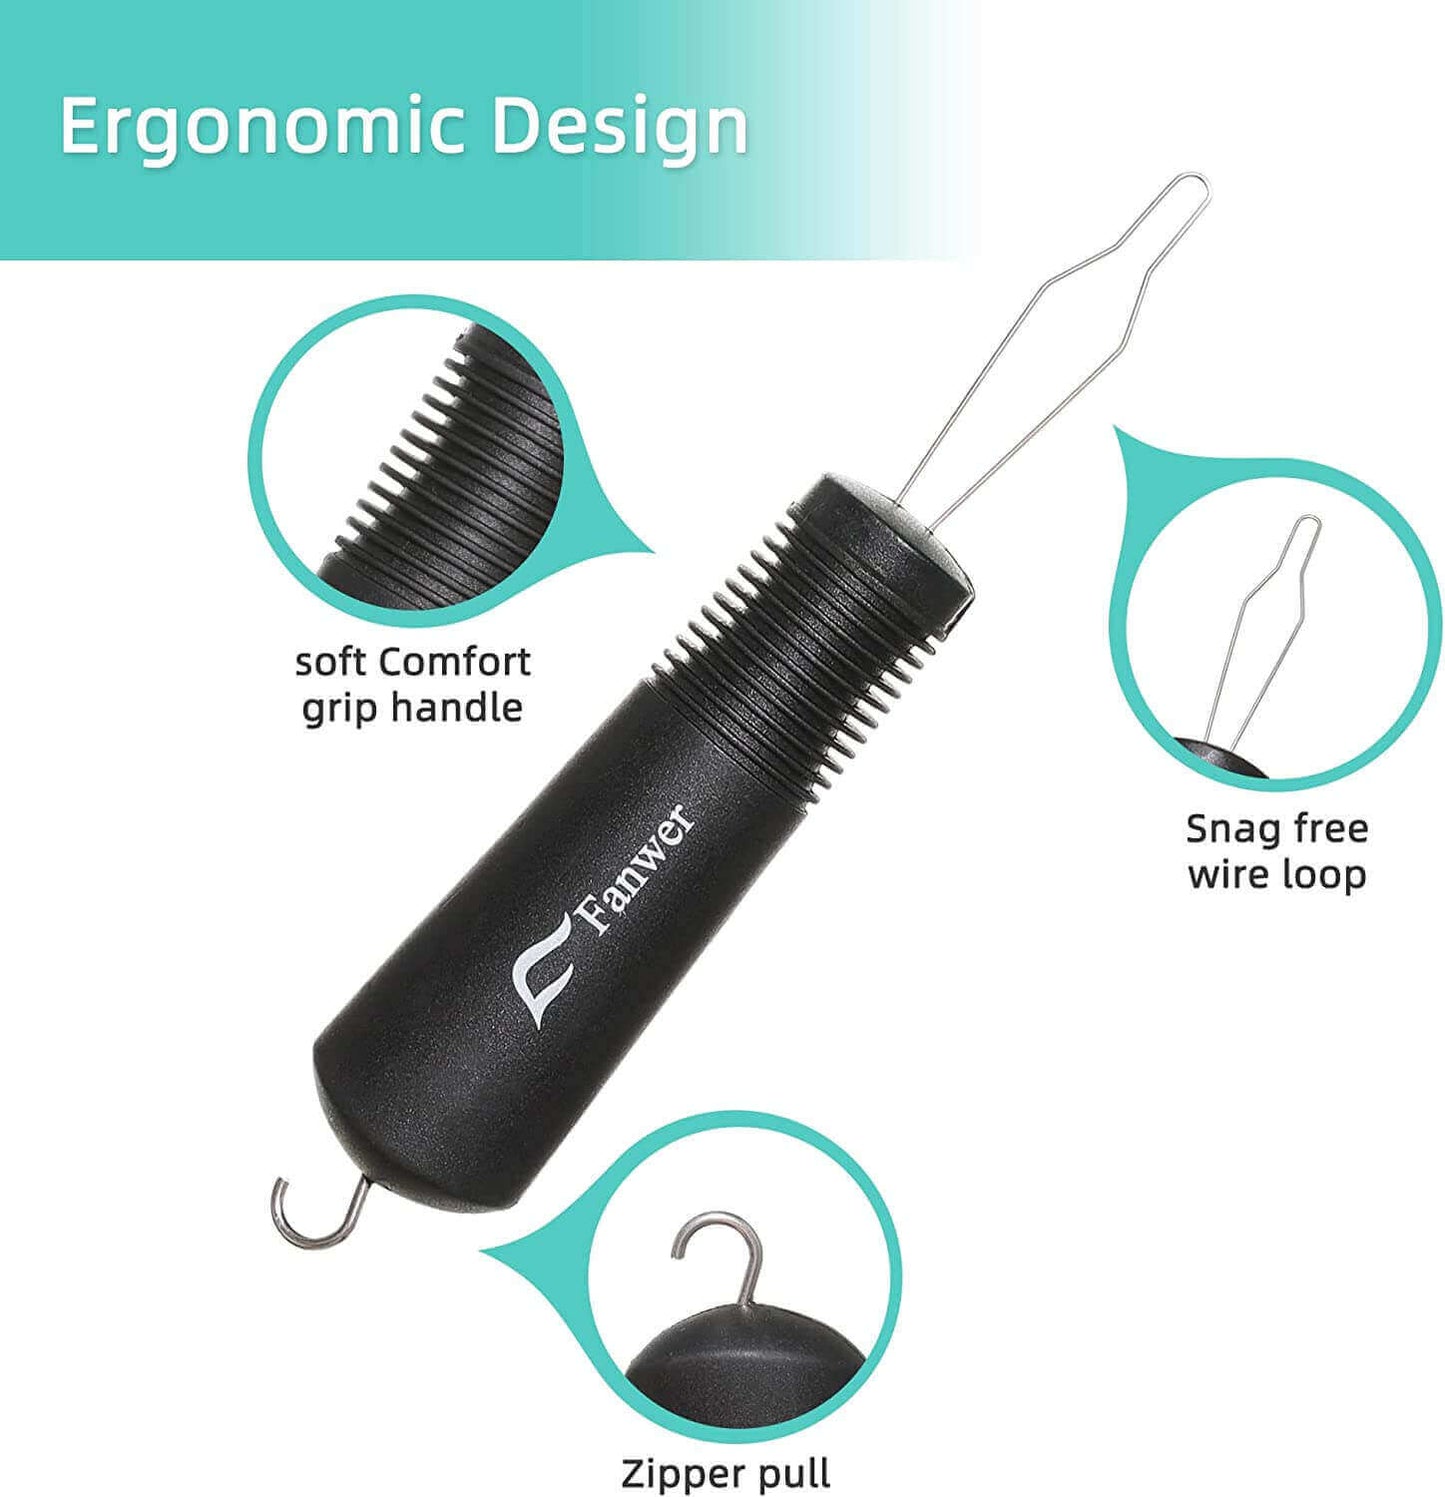 button aid for dressing, button helper with zipper hook, the ergonimic design